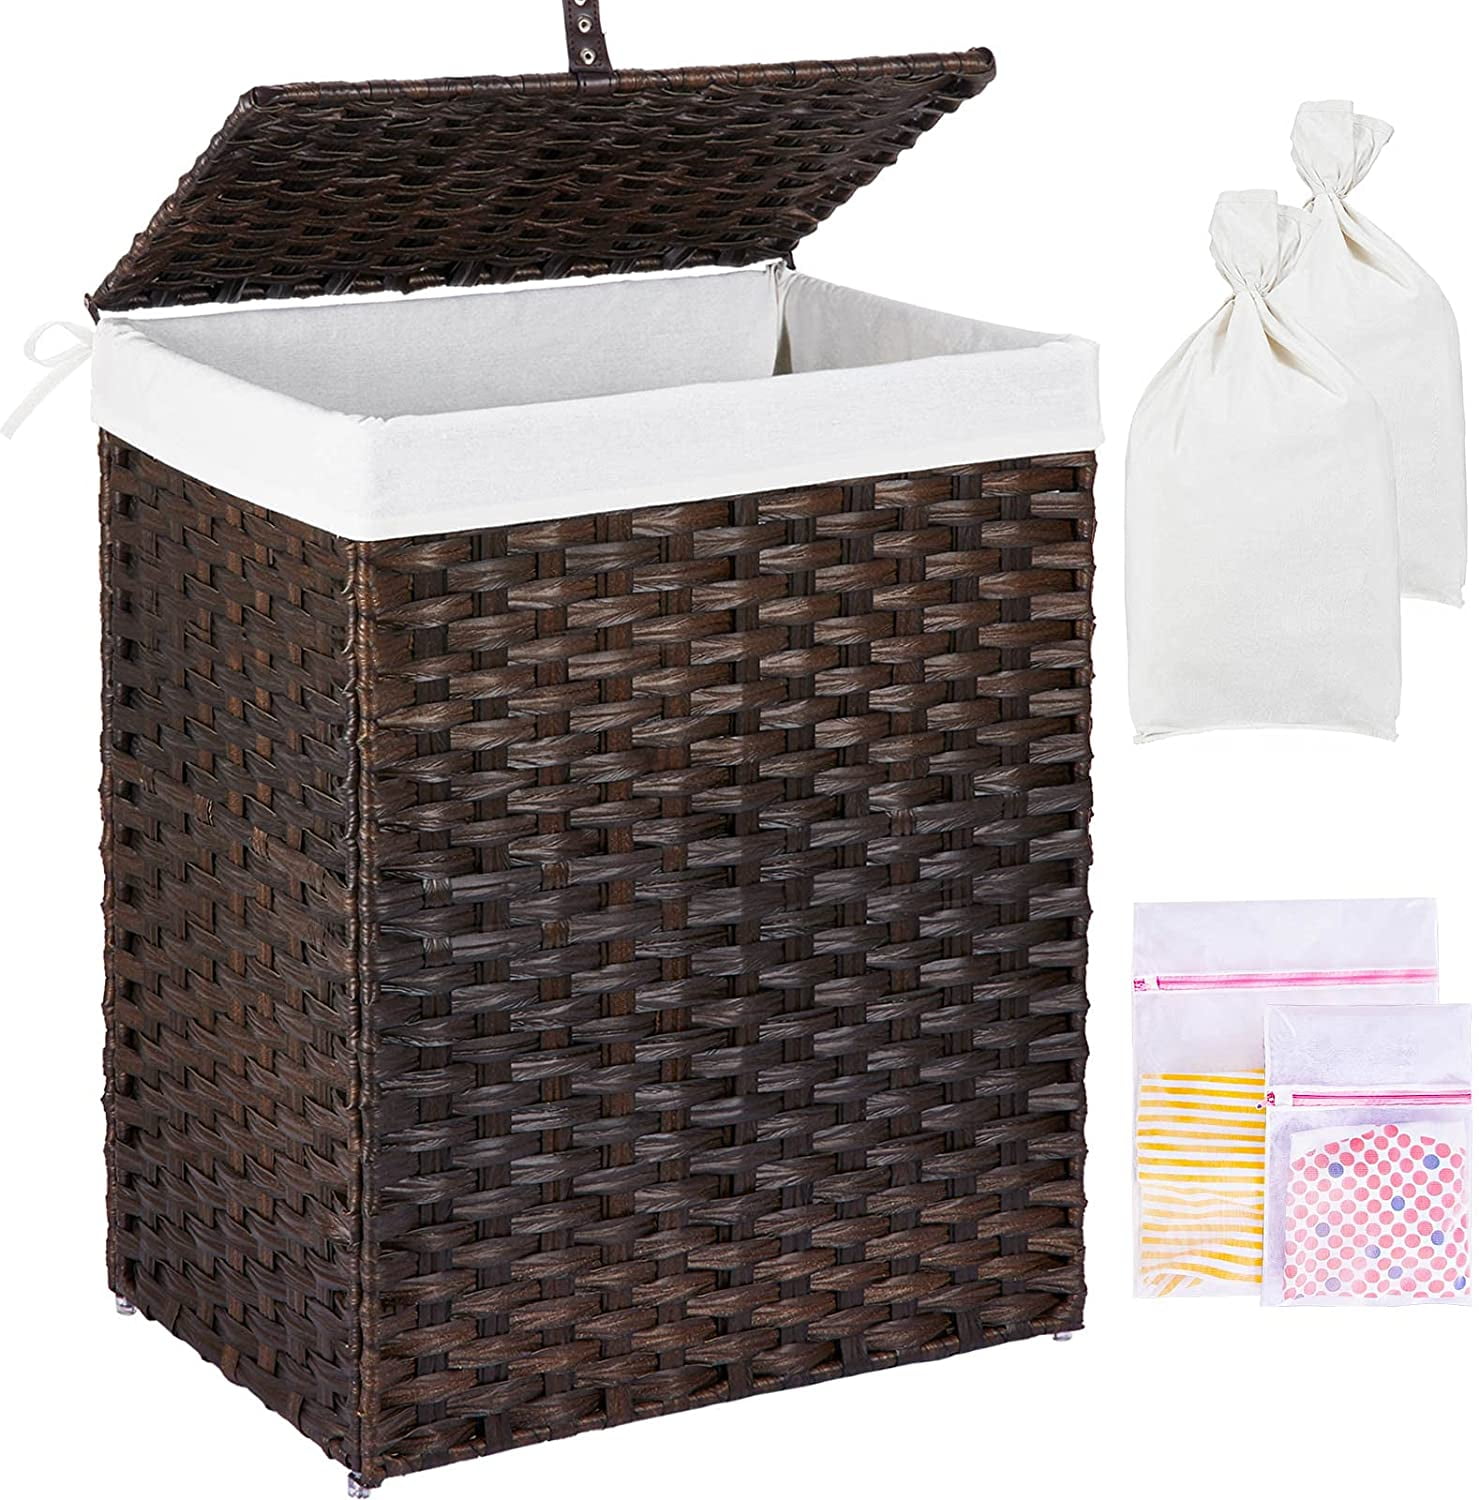 Handwoven Laundry Basket Natural 60L Waterproof Foldable and Easy to Install Clothes Hamper for Bedroom Synthetic Rattan Panier à Linge with Lid and Handles Bathroom Greenstell Laundry Hamper with 2 Removable liner Bags & 2 Mesh Laundry Bags